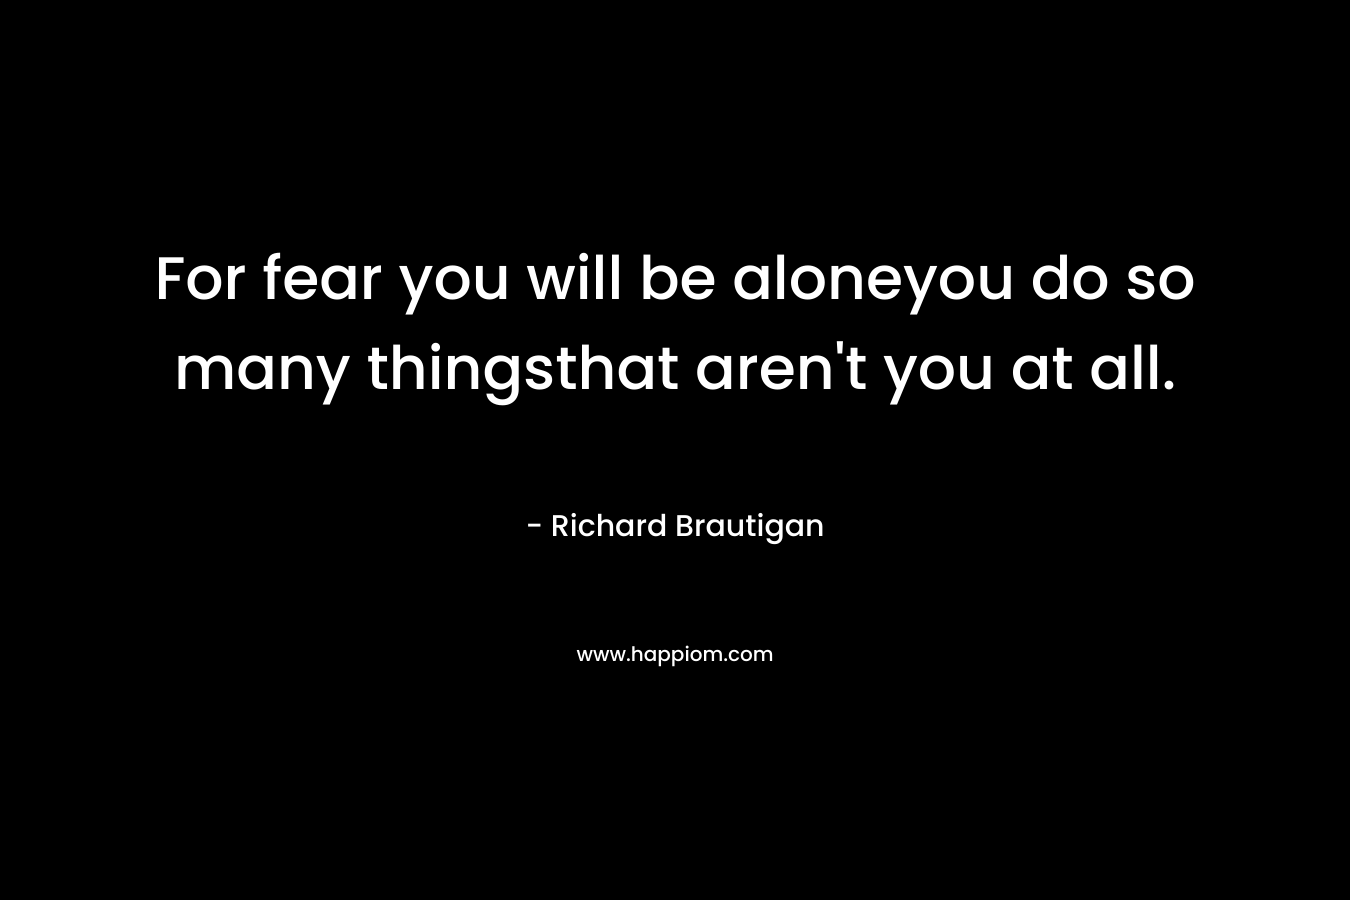 For fear you will be aloneyou do so many thingsthat aren’t you at all. – Richard Brautigan